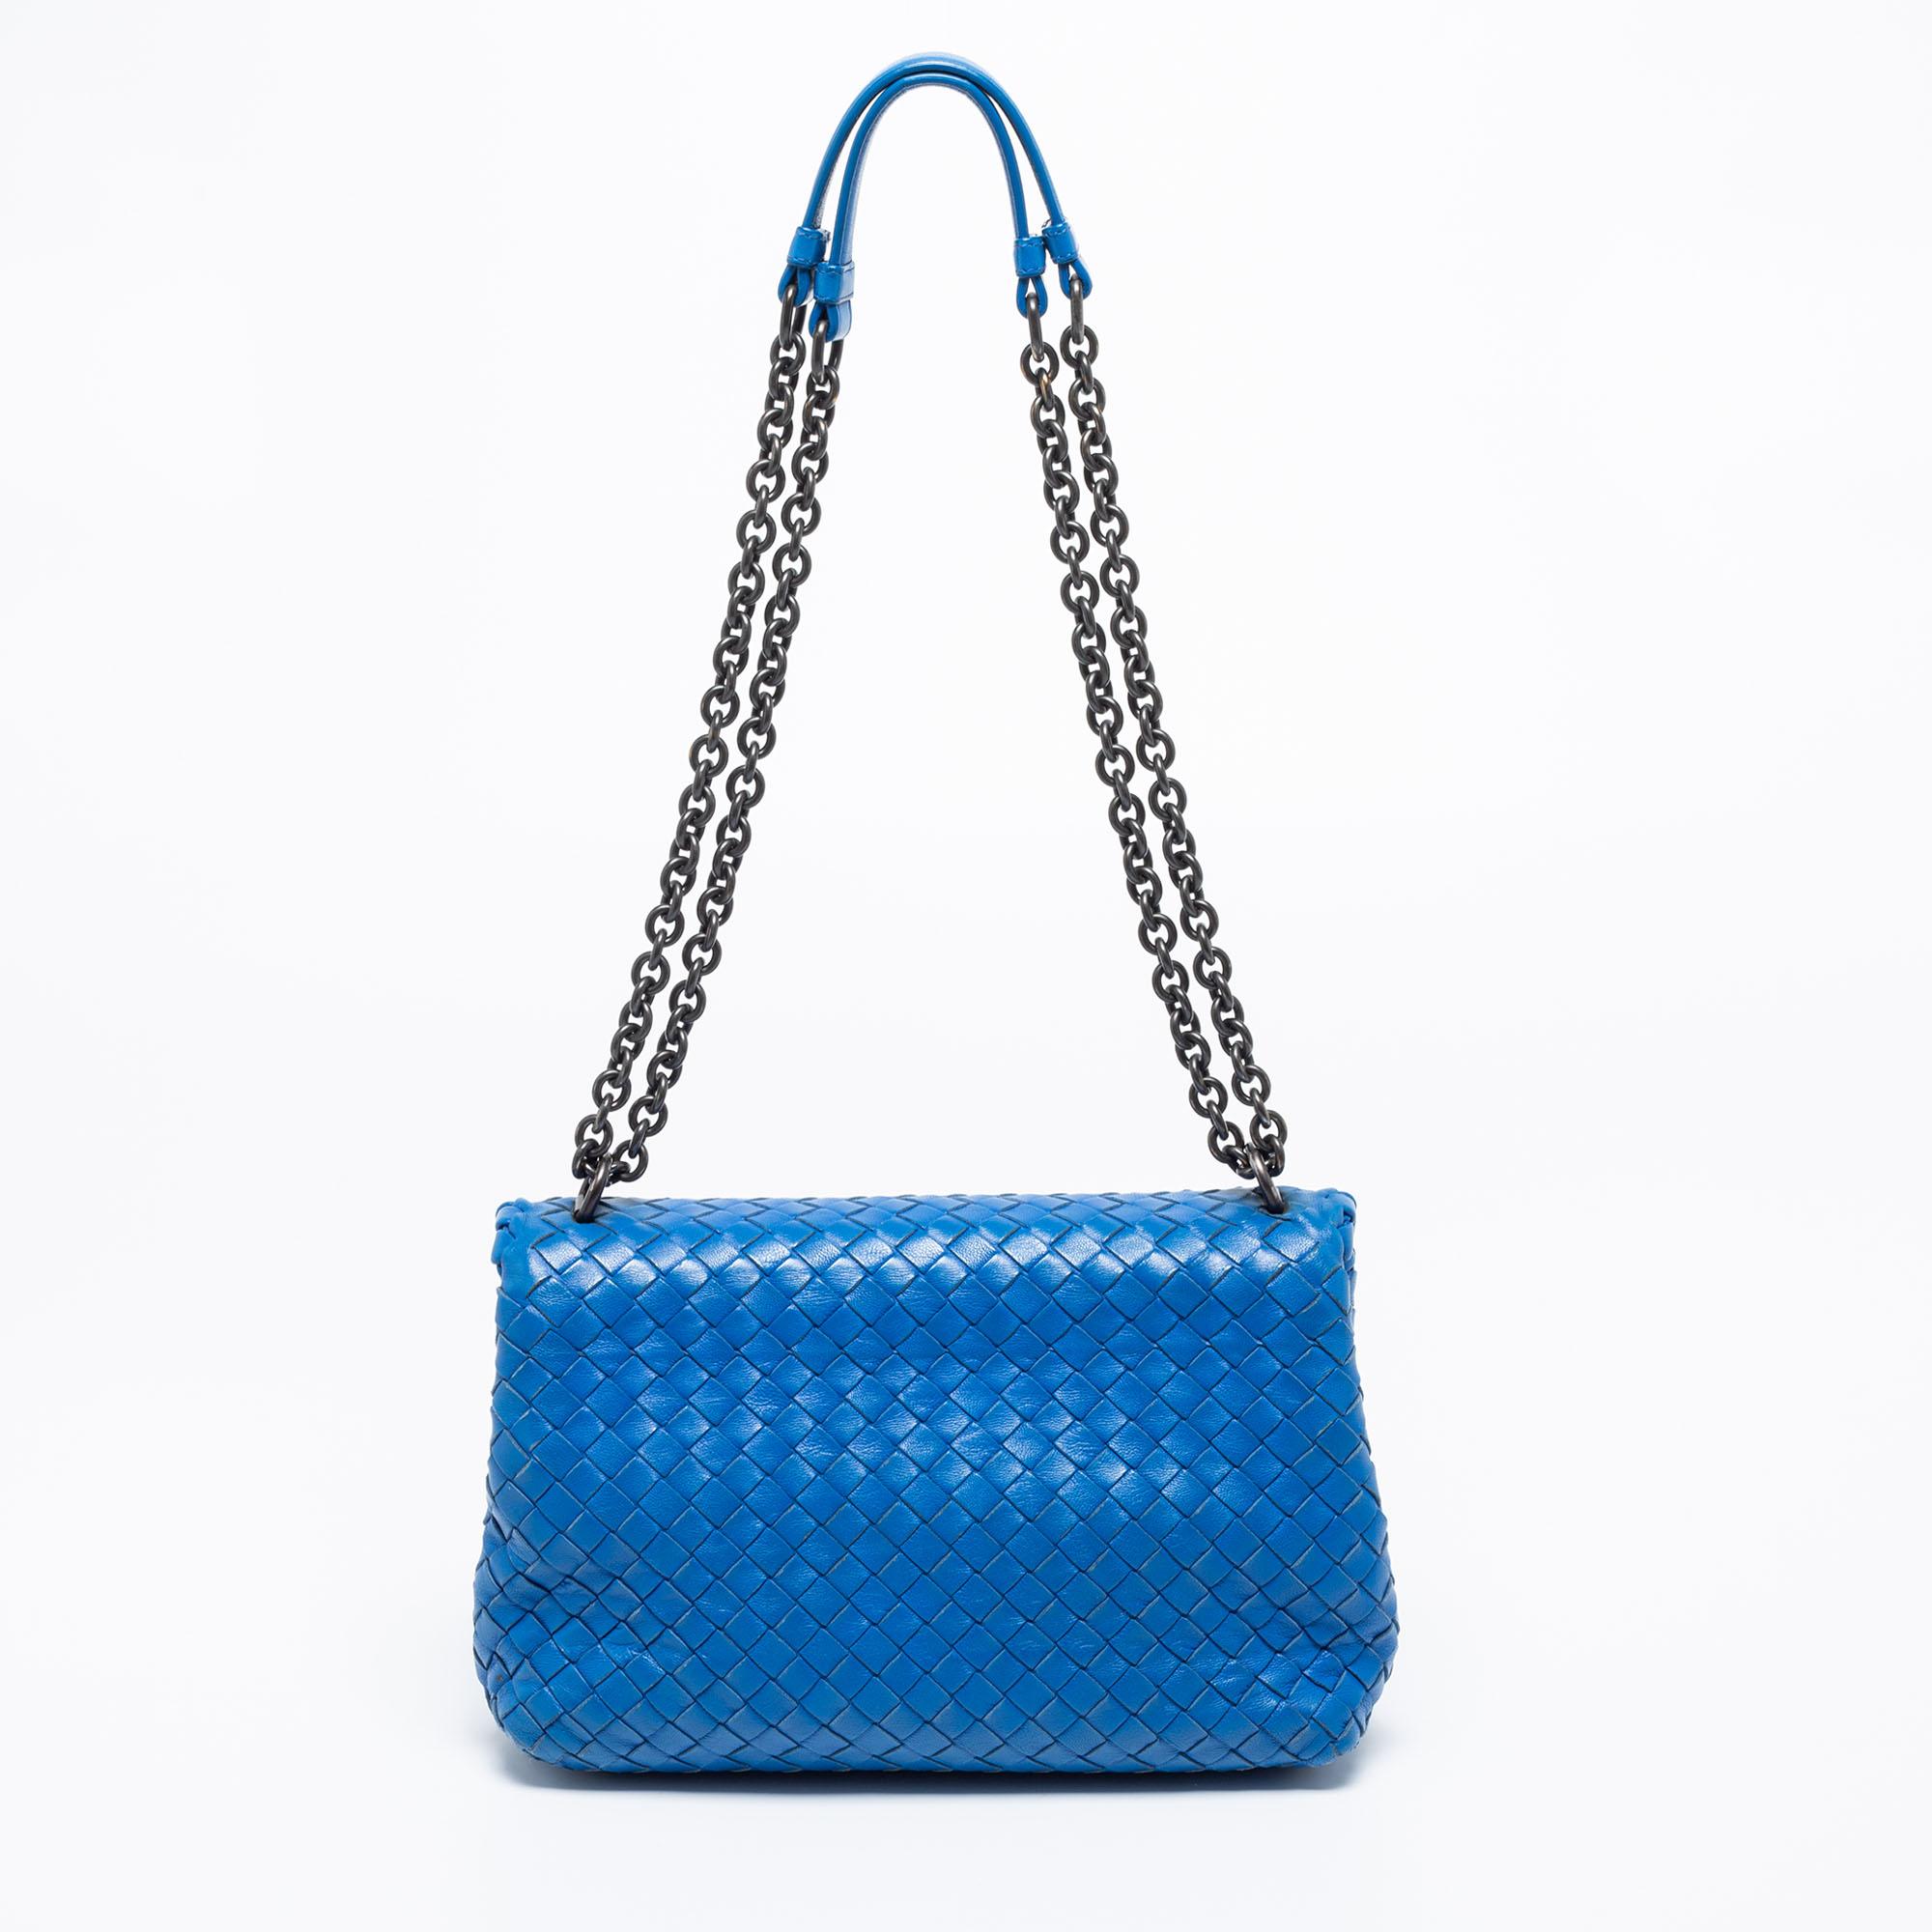 Named after the renaissance building 'Teatro Olimpico,' the Bottega Veneta Olimpia bag reflects the brand's faultless weaving technique. This blue creation comes made from Intrecciato leather and is held by dual chain-leather handles at the top.